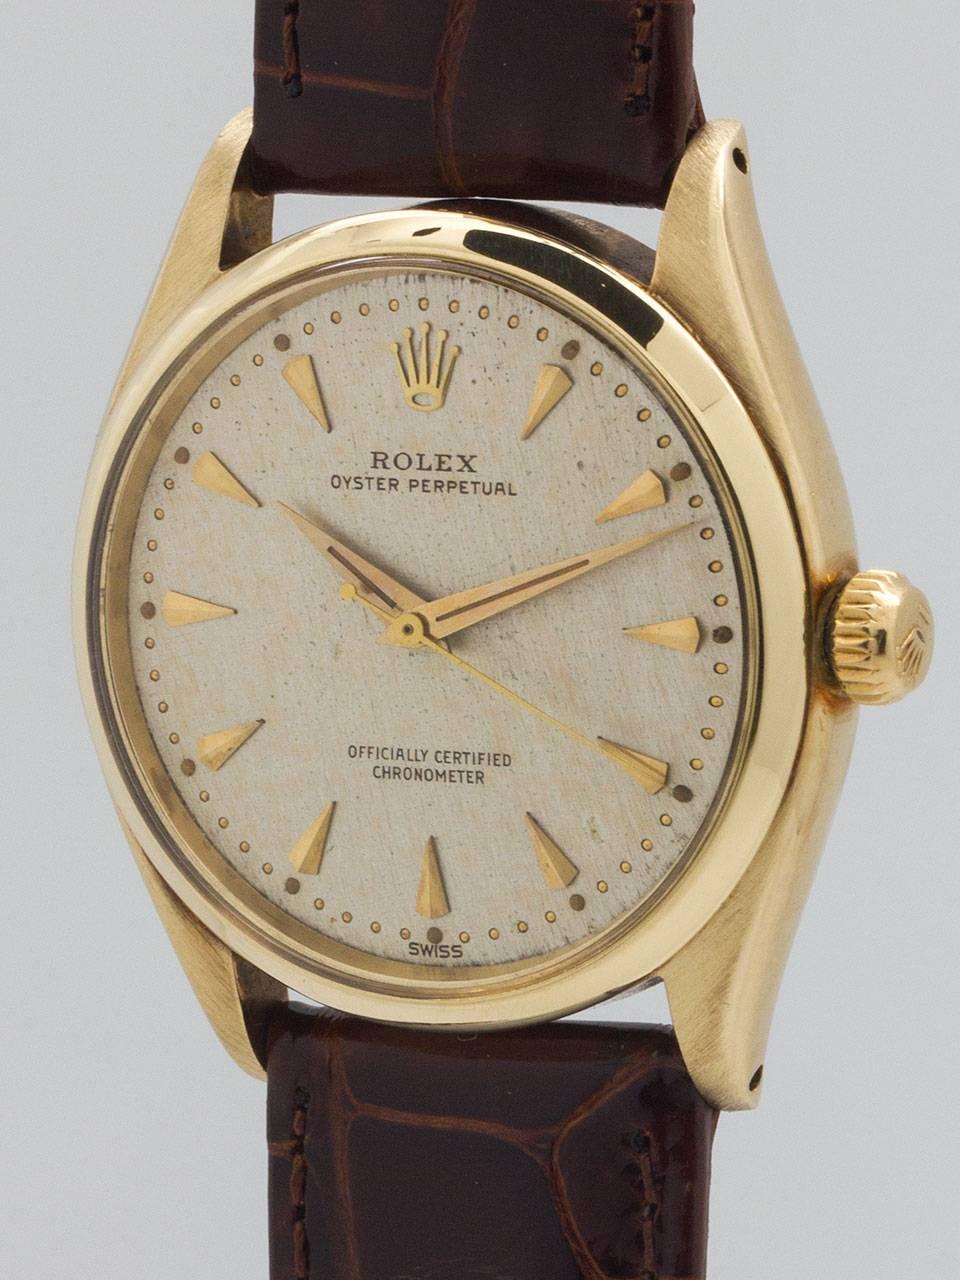 
Rolex Oyster Perpetual 14K Gold ref 6564 serial # 435,xxx circa 1960. Featuring 34mm diameter Oyster case with screw down crown and caseback. Featuring an unusual, original matte silvered finely textured dial with stylized applied tapered and